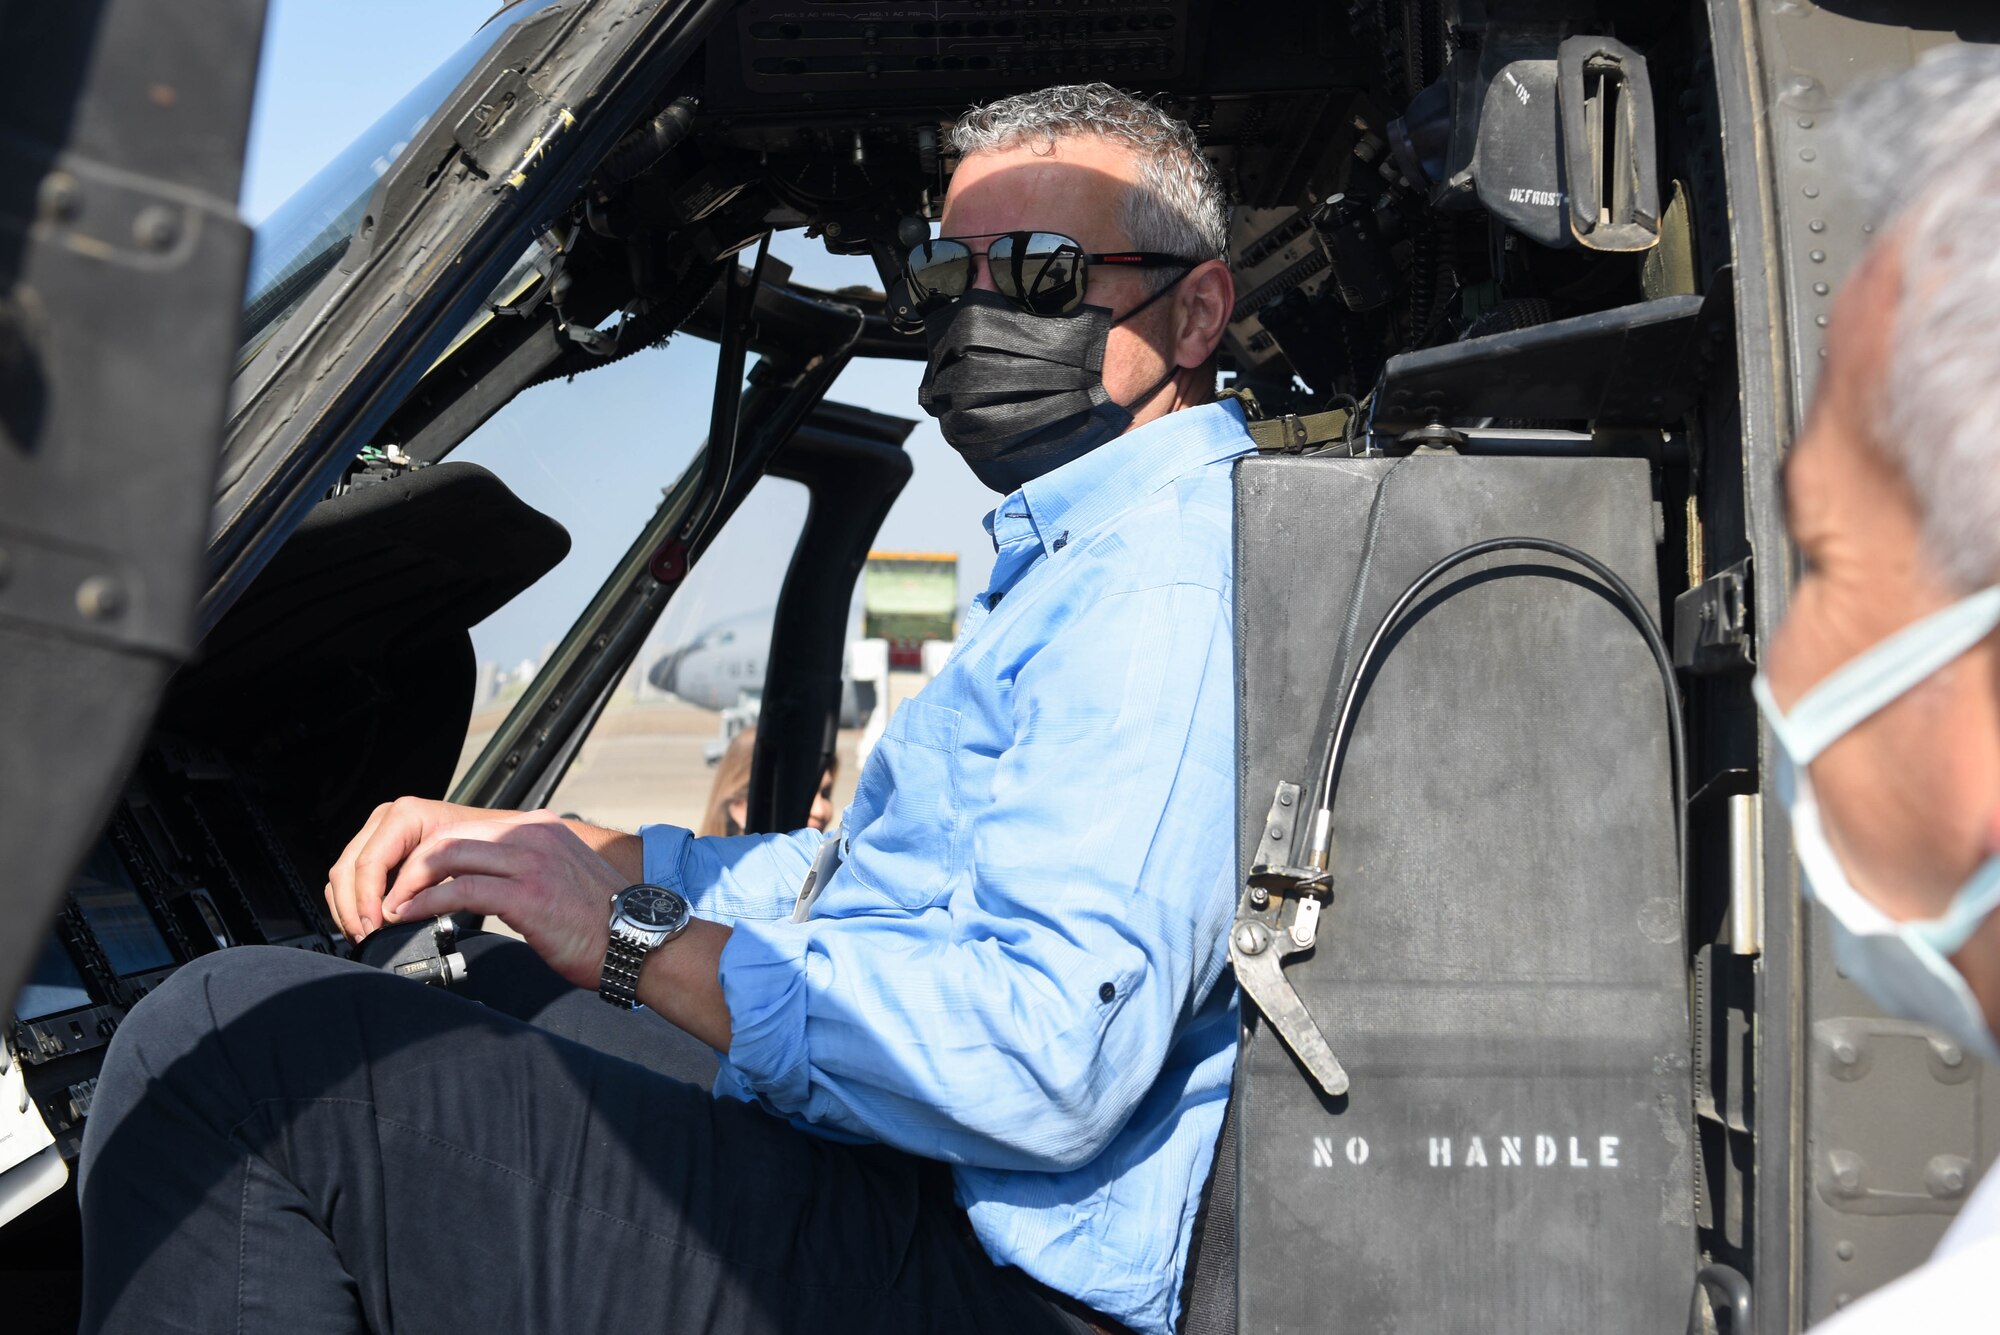 A Turkish medical professional sits in the cockpit of an U.S. Army UH-60 Black Hawk helicopter